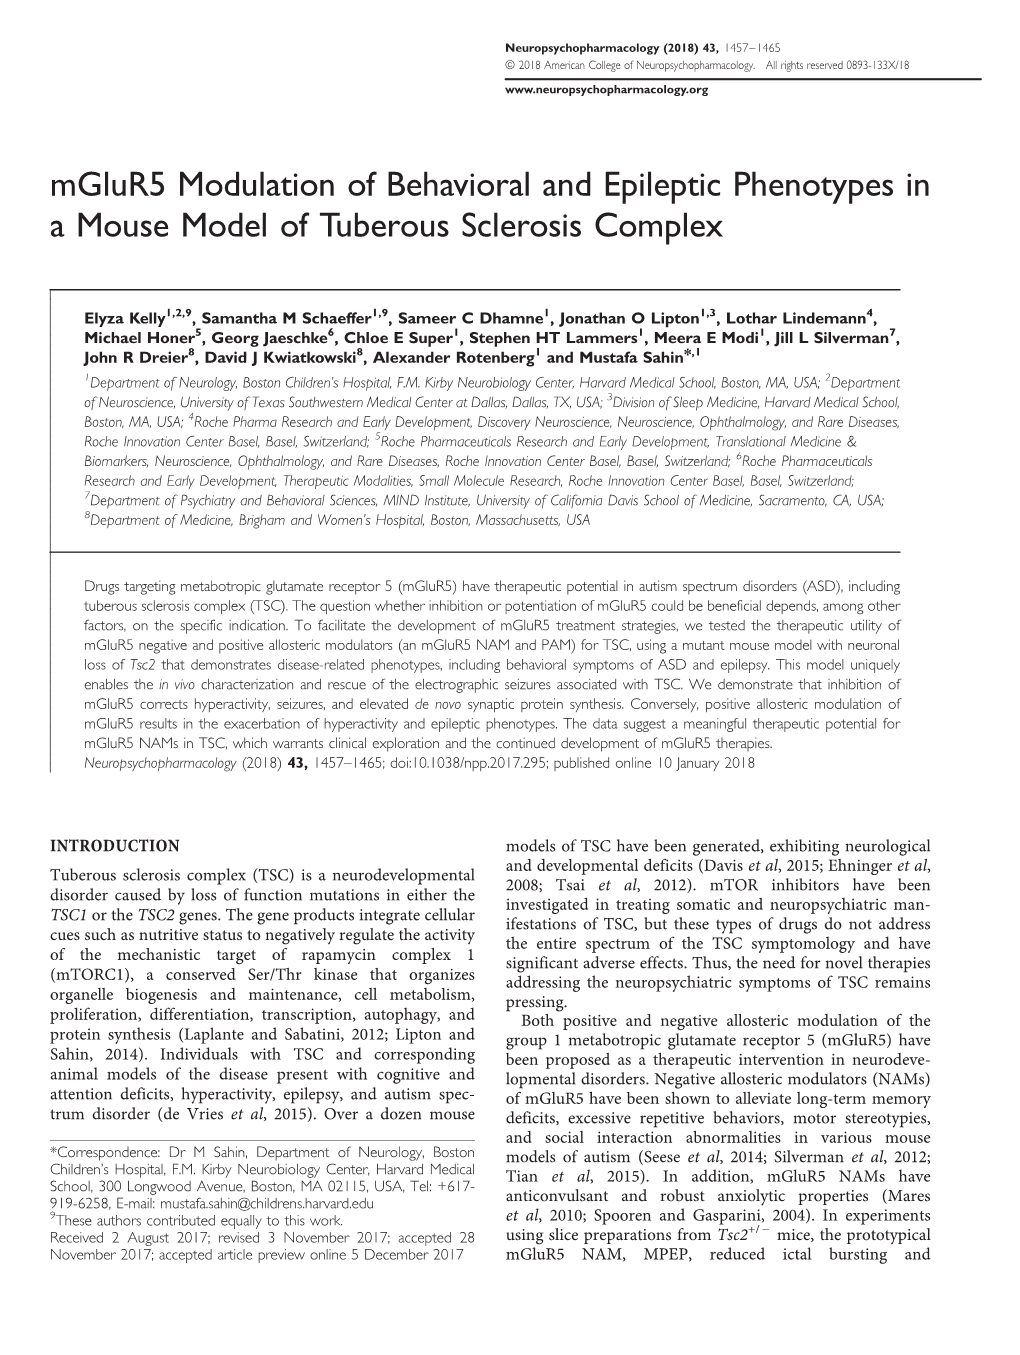 Mglur5 Modulation of Behavioral and Epileptic Phenotypes in a Mouse Model of Tuberous Sclerosis Complex